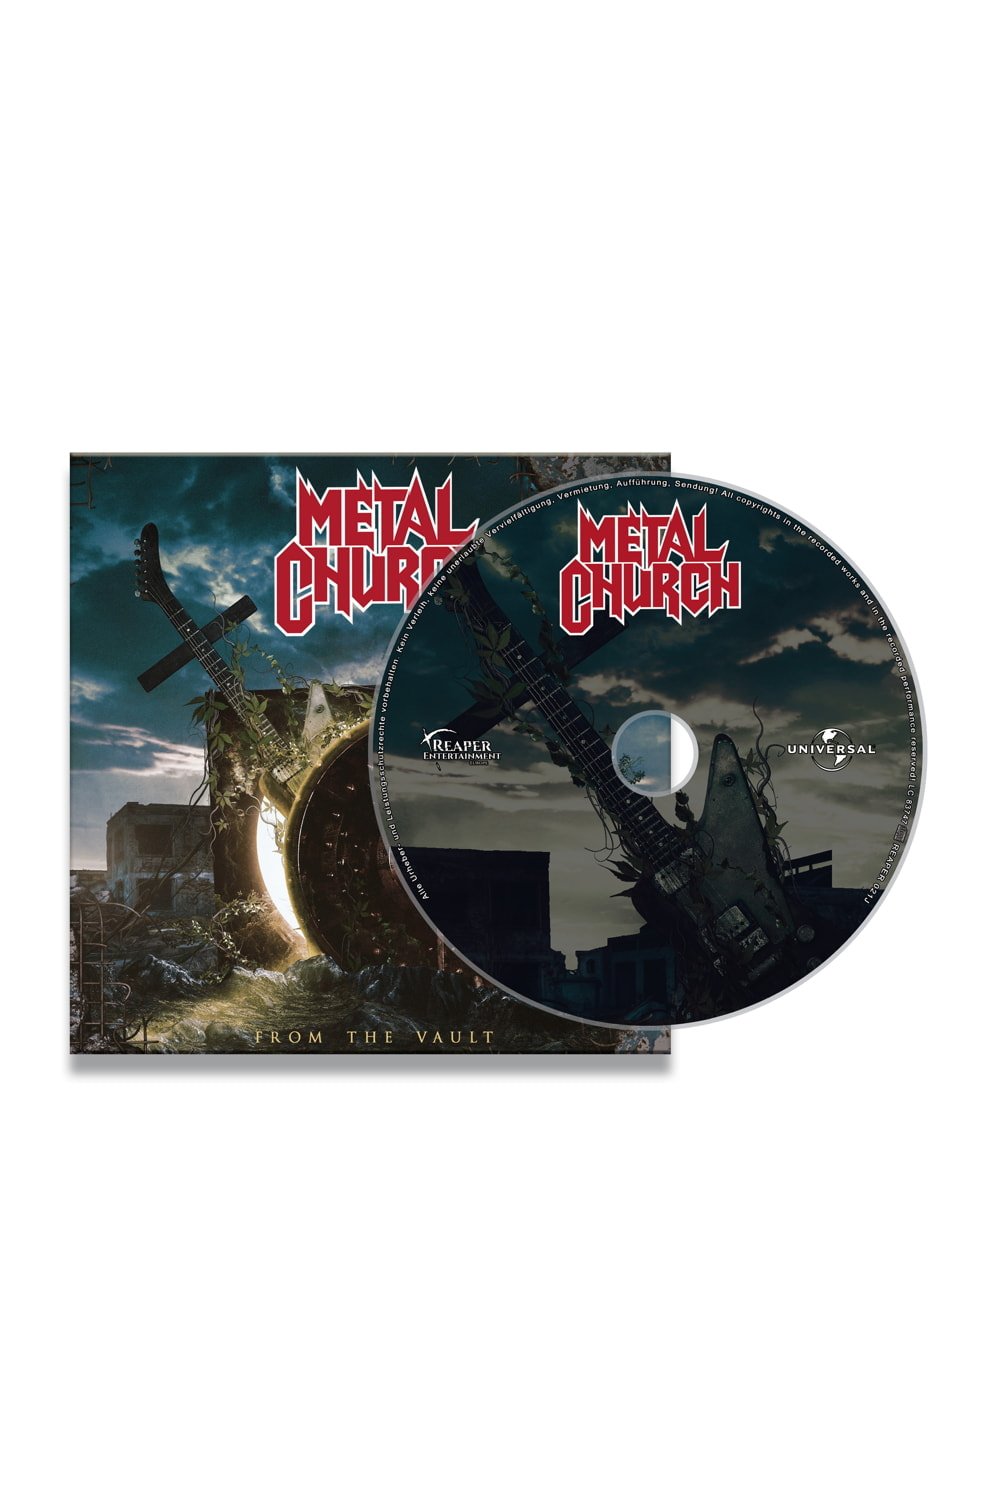 Image of METAL CHURCH - From The Vault - CD